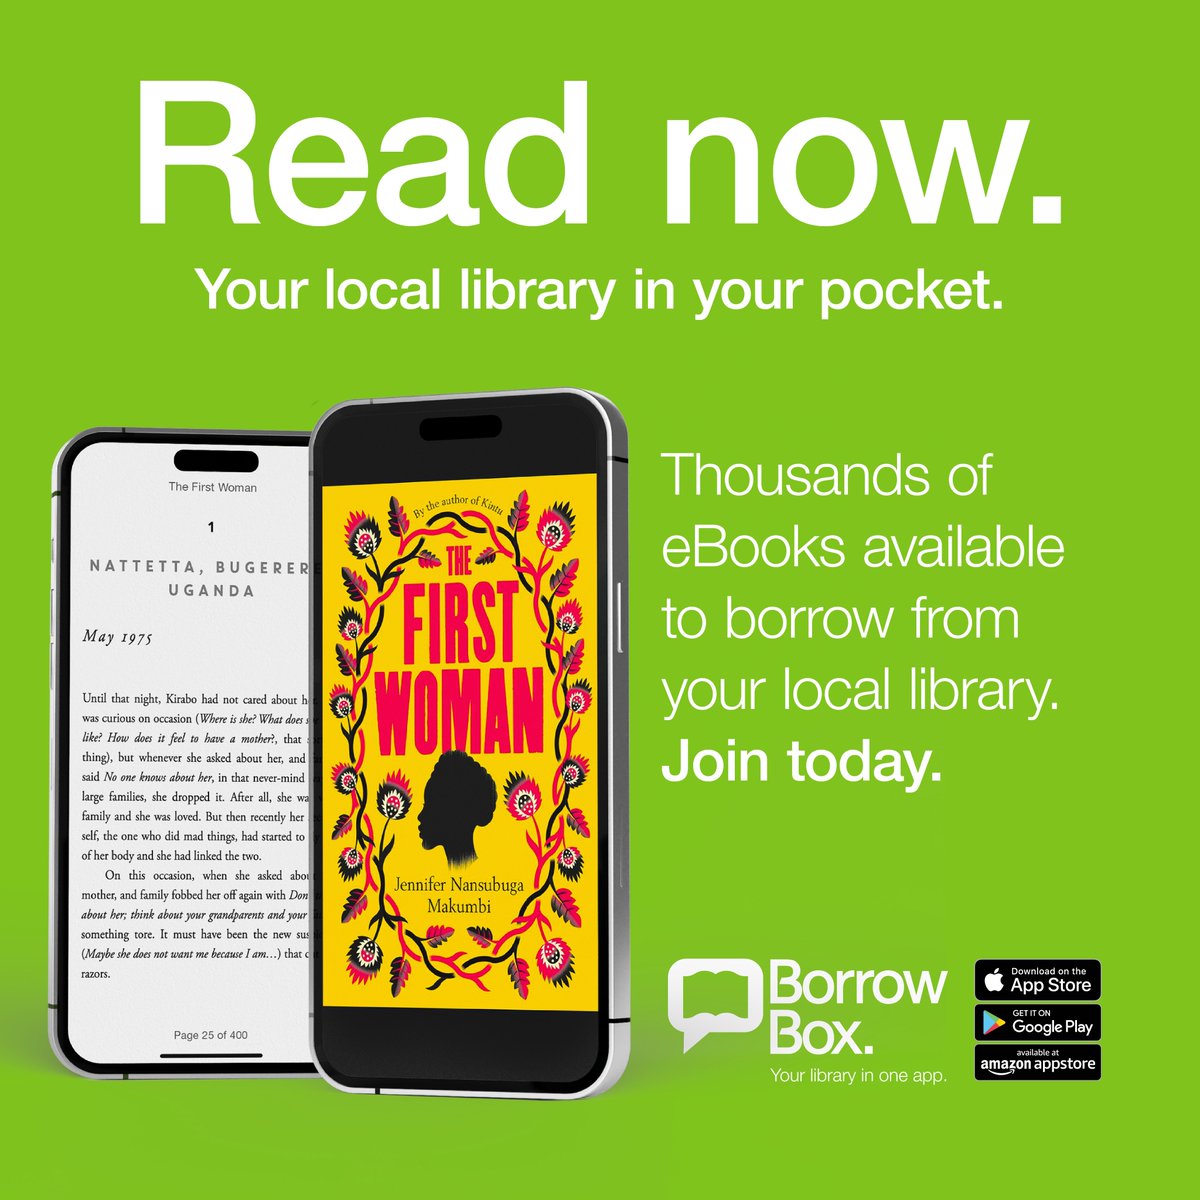 This #BlackHistoryMonth , #Borrowbox have made available the stunning second novel from Jennifer Makumbi. Steeped in the rich folklore of Uganda, with an eye firmly on the future, she has written a sweeping, effervescent tale of longing, femininity & courage. #SalutingOurSisters